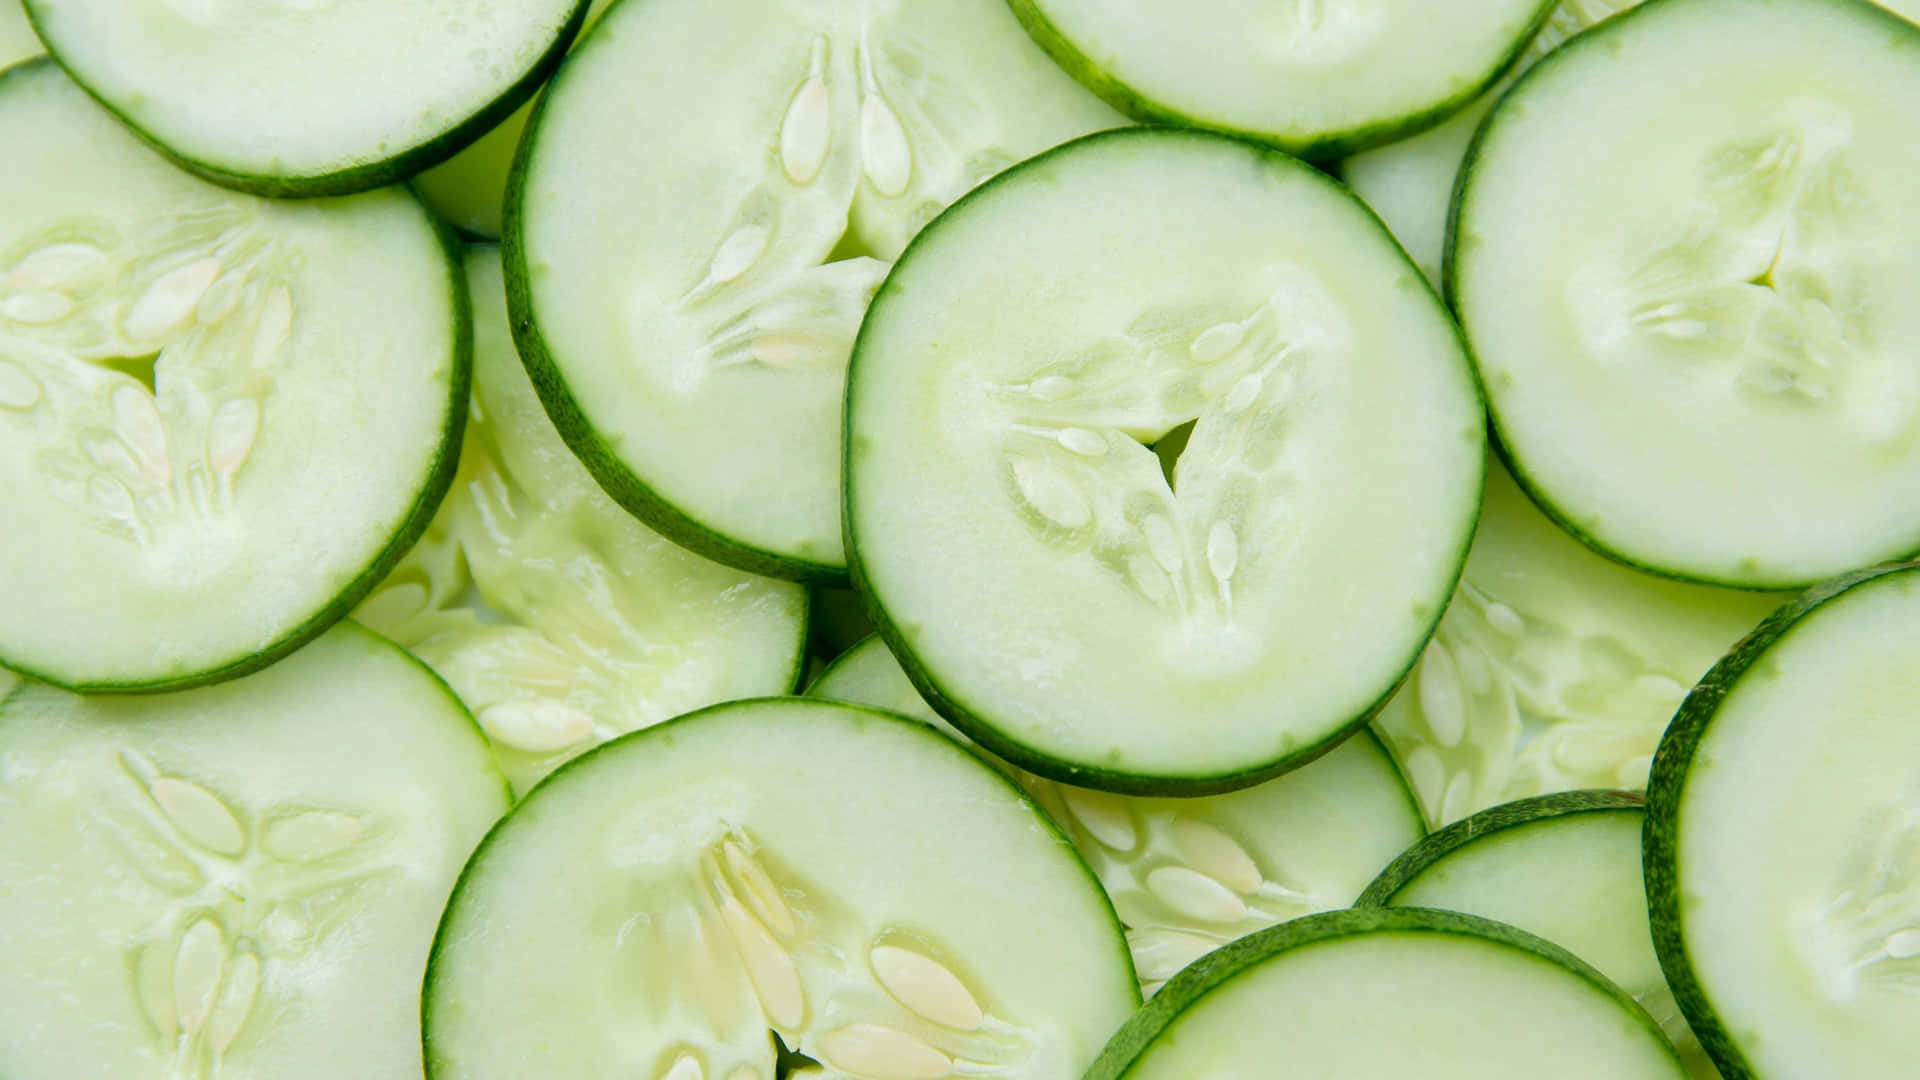 Cucumbers are the perfect accompaniment to salads and sandwiches